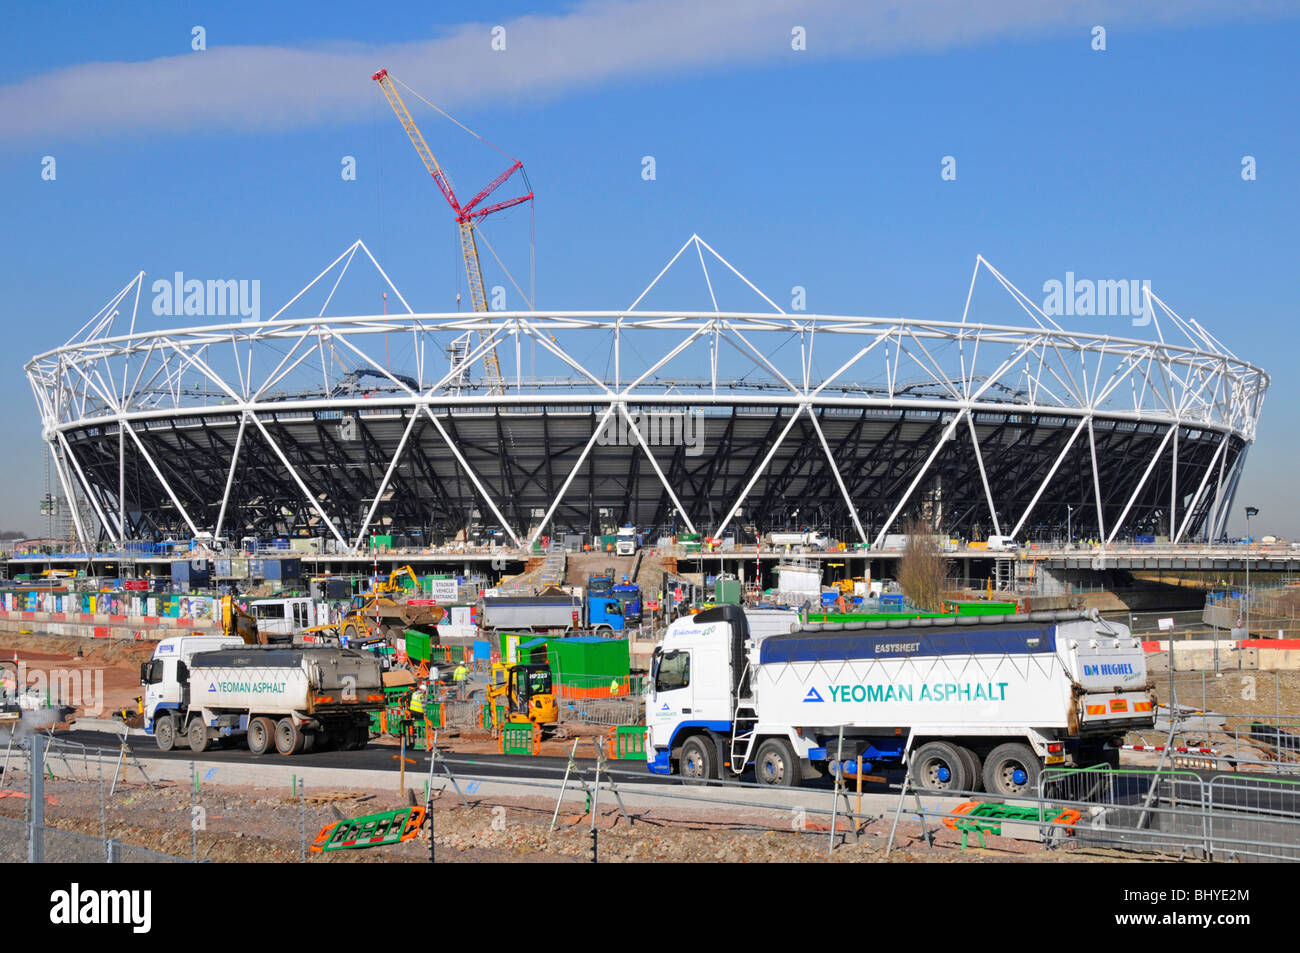 London 2012 Olympic Paralympic Games main sports stadium construction building site activity work in progress Stratford Newham East London England UK Stock Photo